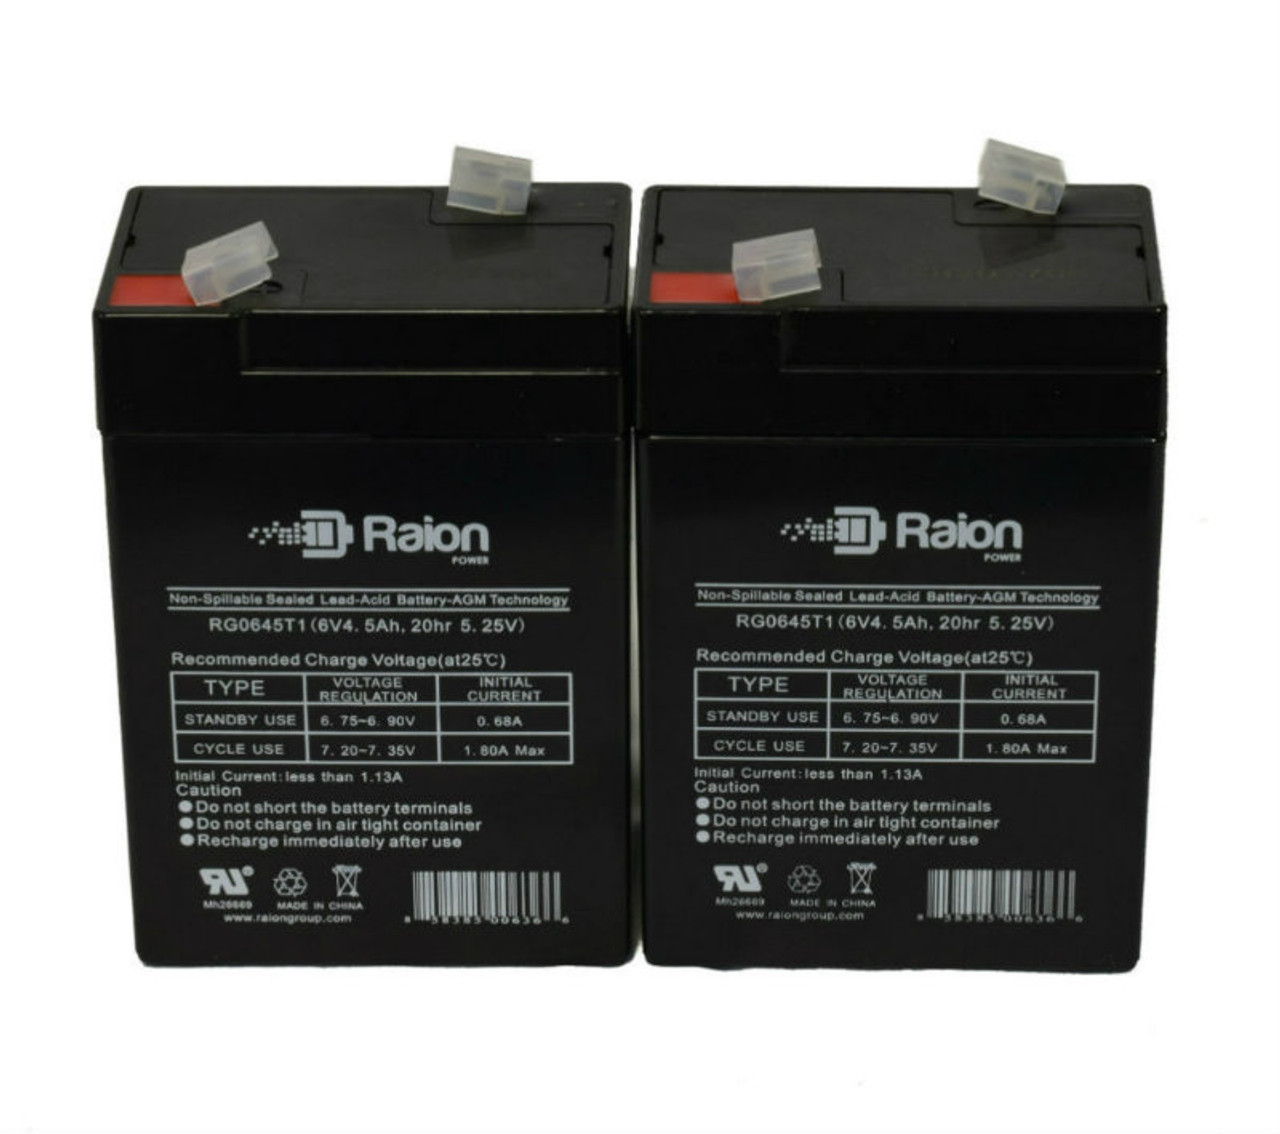 Raion Power 6 Volt 4.5Ah RG0645T1 Replacement Battery for LONG WP5-6 - 2 Pack